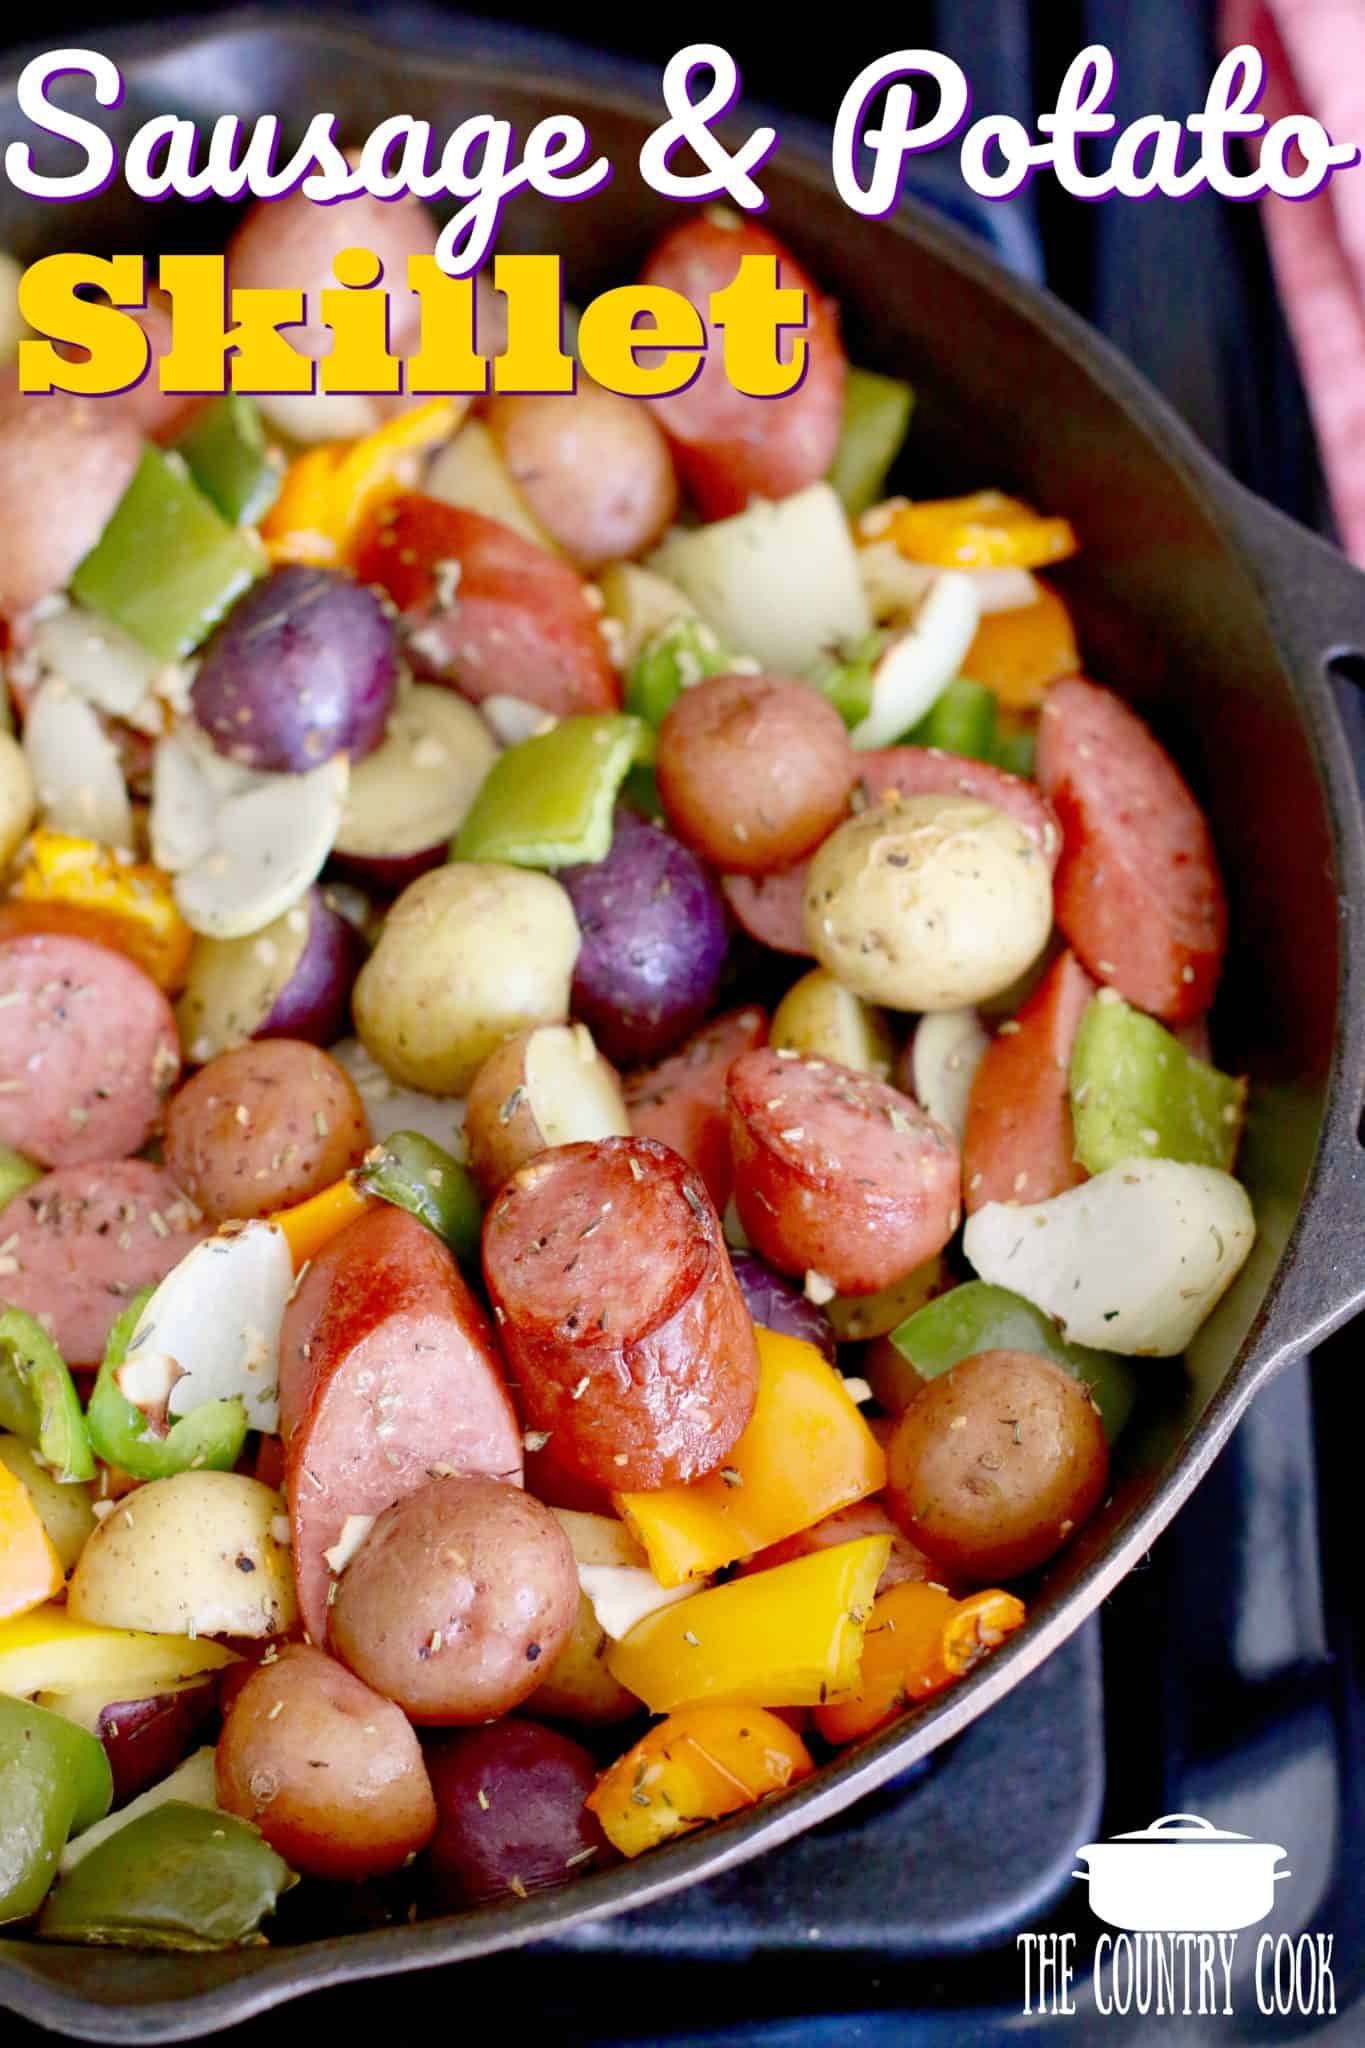 One Pan Seasoned Sausage and Potatoes recipe from The Country Cook - final dish shown fully cooked in a cast iron skillet.